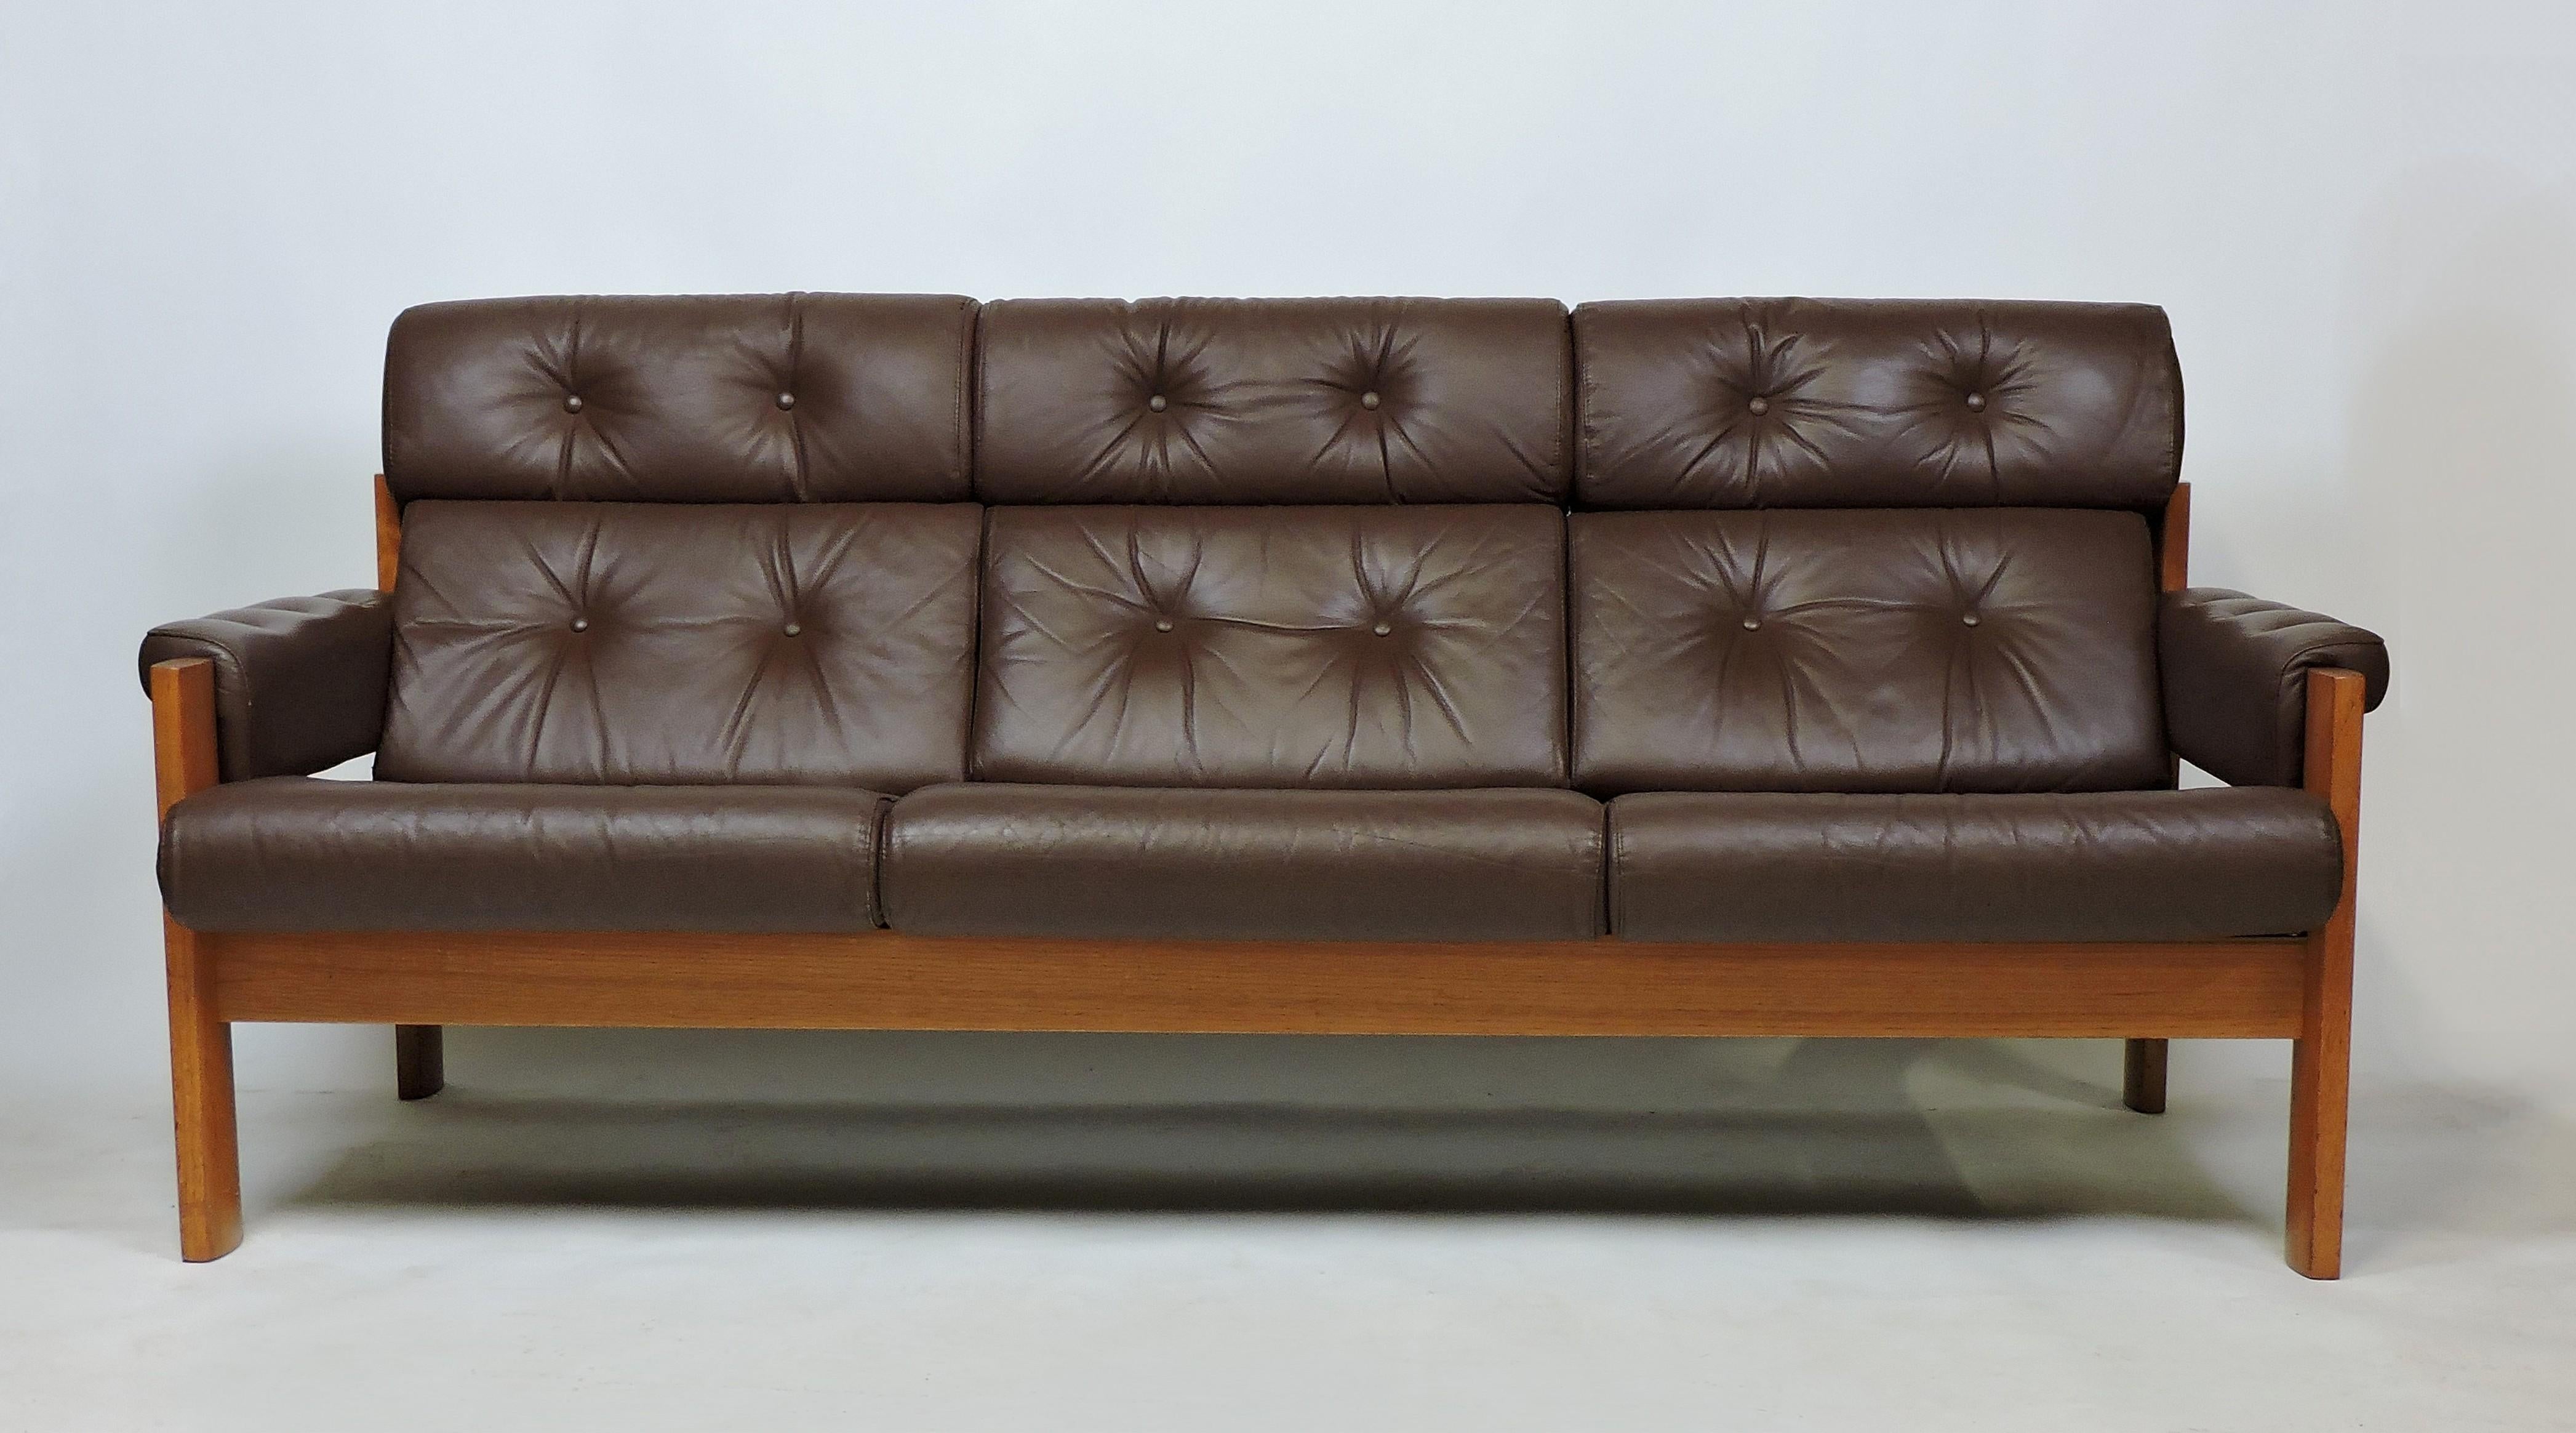 Handsome and comfortable three-seat Amigo sofa made in Norway by high quality furniture manufacturer, Ekornes. It has great craftsmanship with a sculpted solid teak frame and dark brown tufted leather and fabric upholstery. All of the cushions are